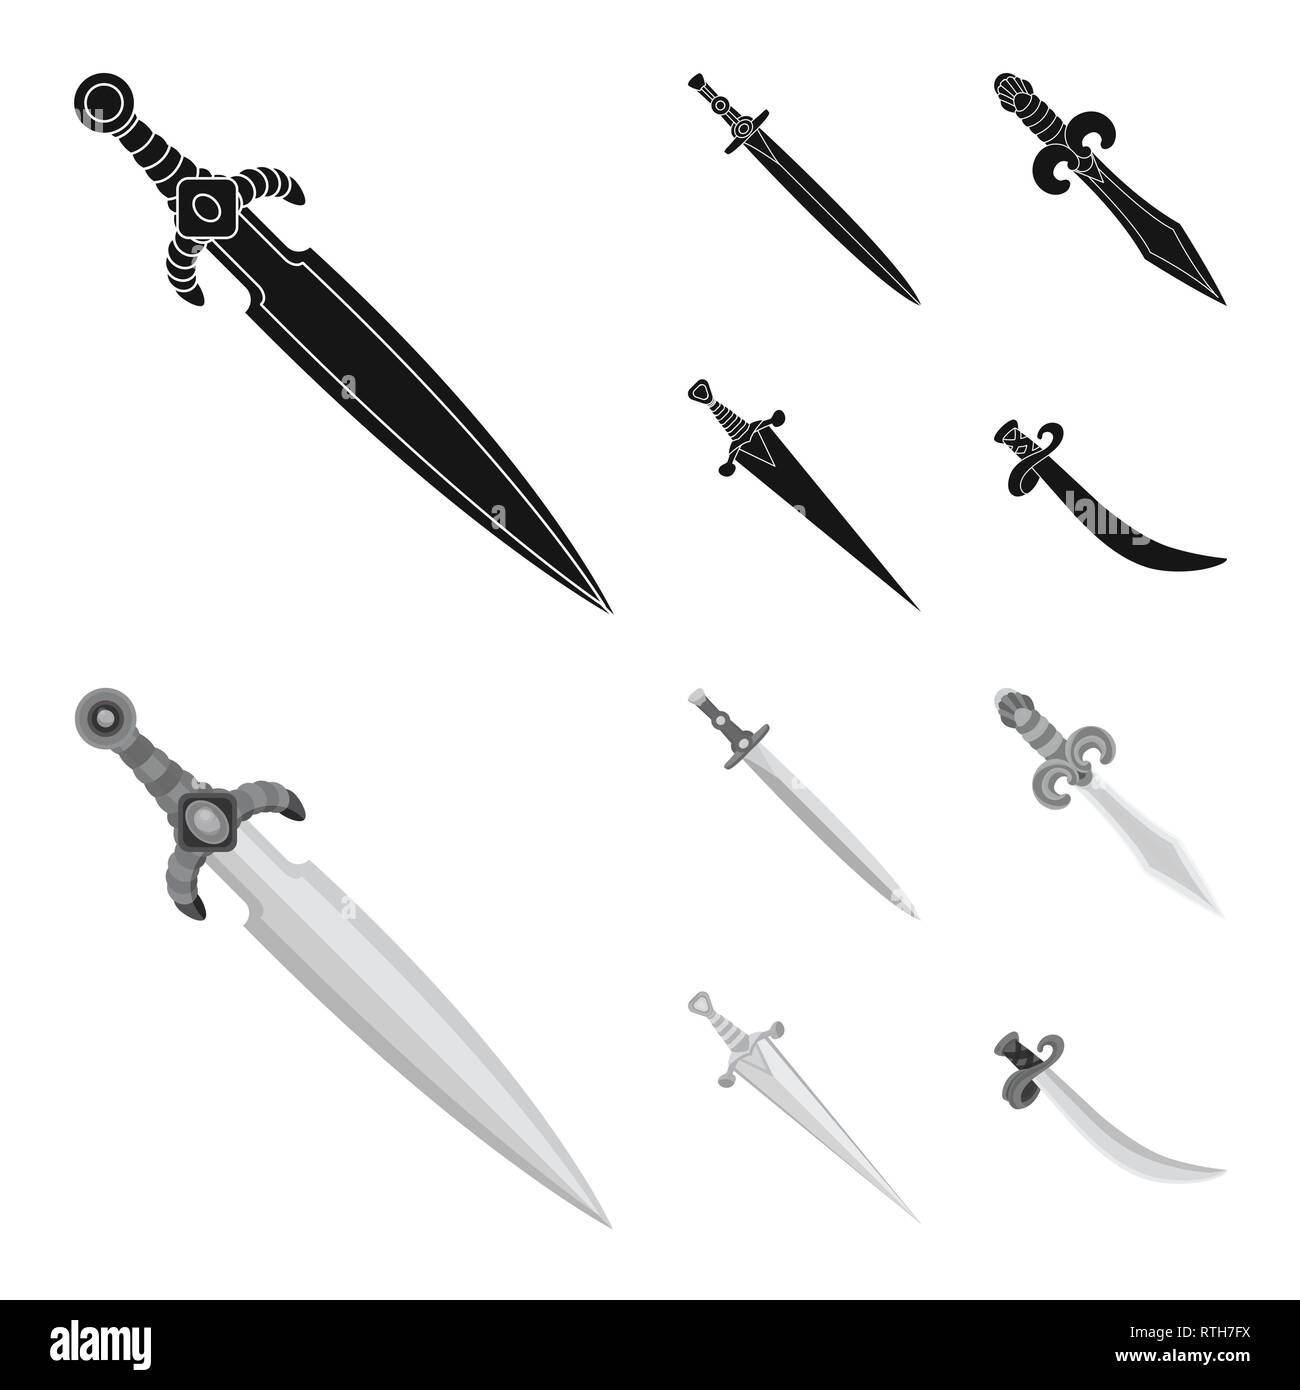 Spanish,longsword,power,battle,handle,hilt,scimitar,conqueror,decoration,pirate,steel,star,gold,silver,copper,murder,ornament,stone,warrior,soldier,ruby,military,fantasy,game,armor,sharp,blade,sword,dagger,knife,weapon,saber,medieval,set,vector,icon,illustration,isolated,collection,design,element,graphic,sign Vector Vectors , Stock Vector